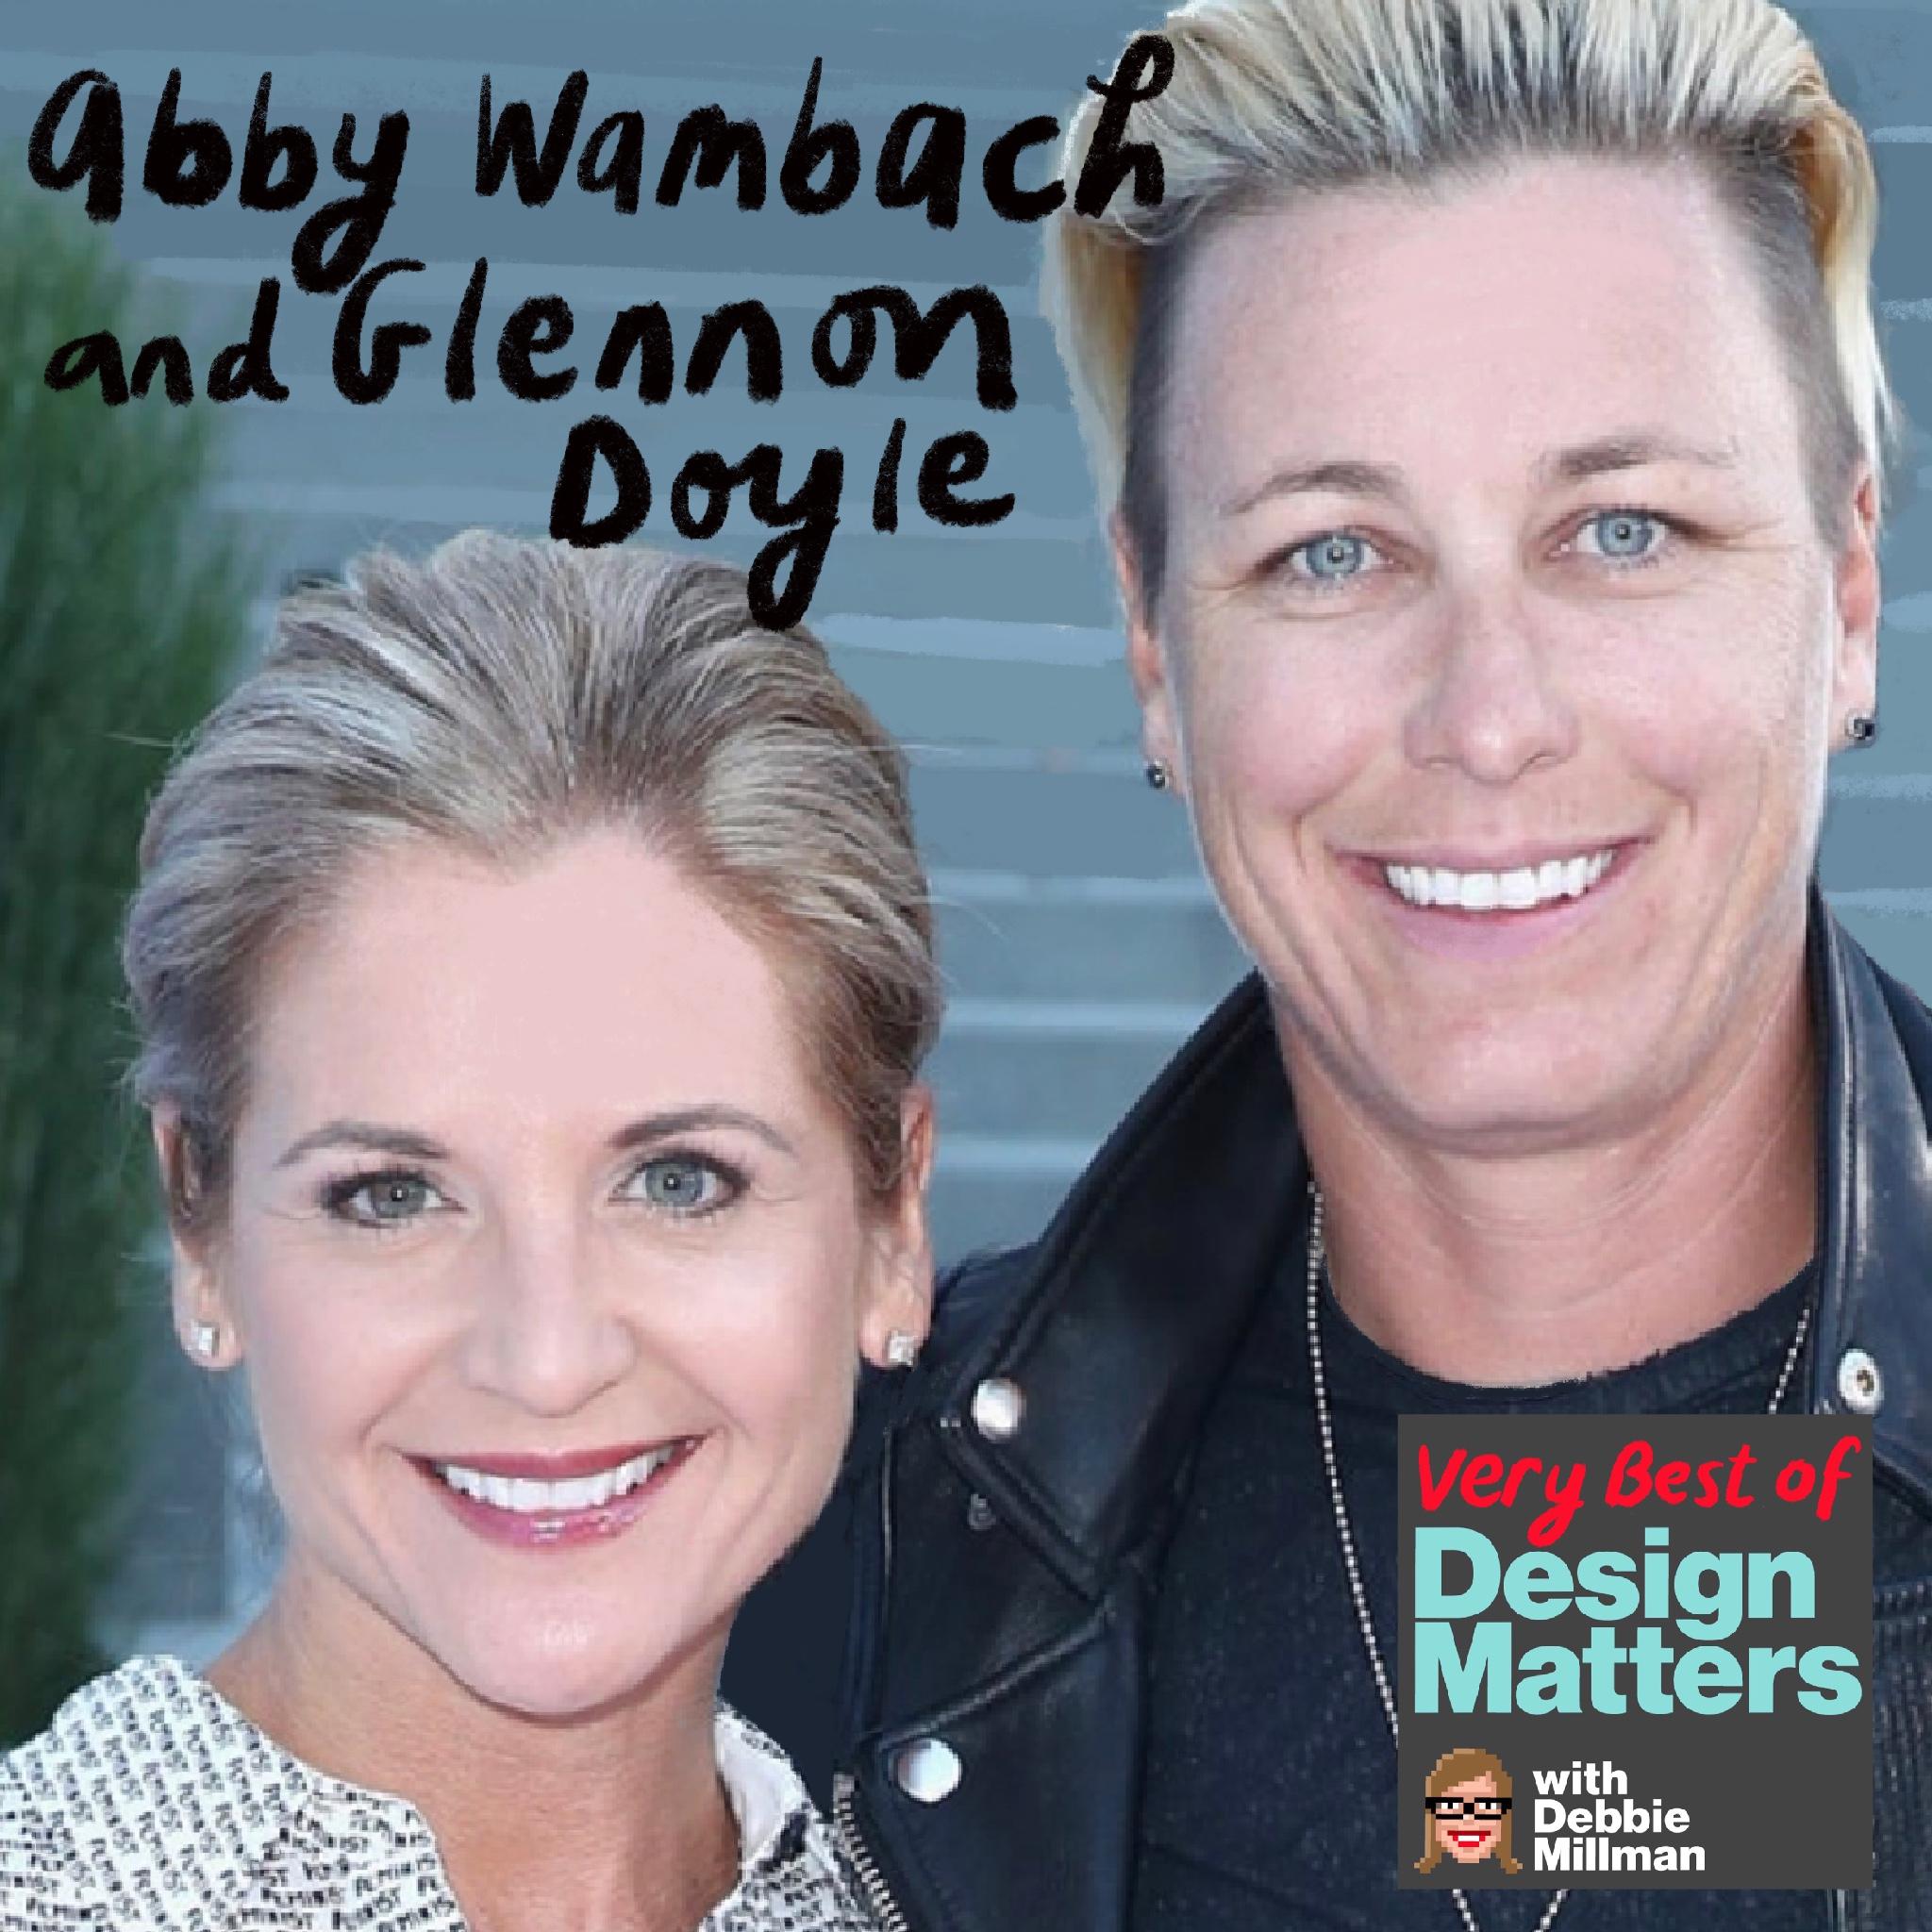 Thumbnail for "Best of Design Matters: Glennon Doyle & Abby Wambach ".